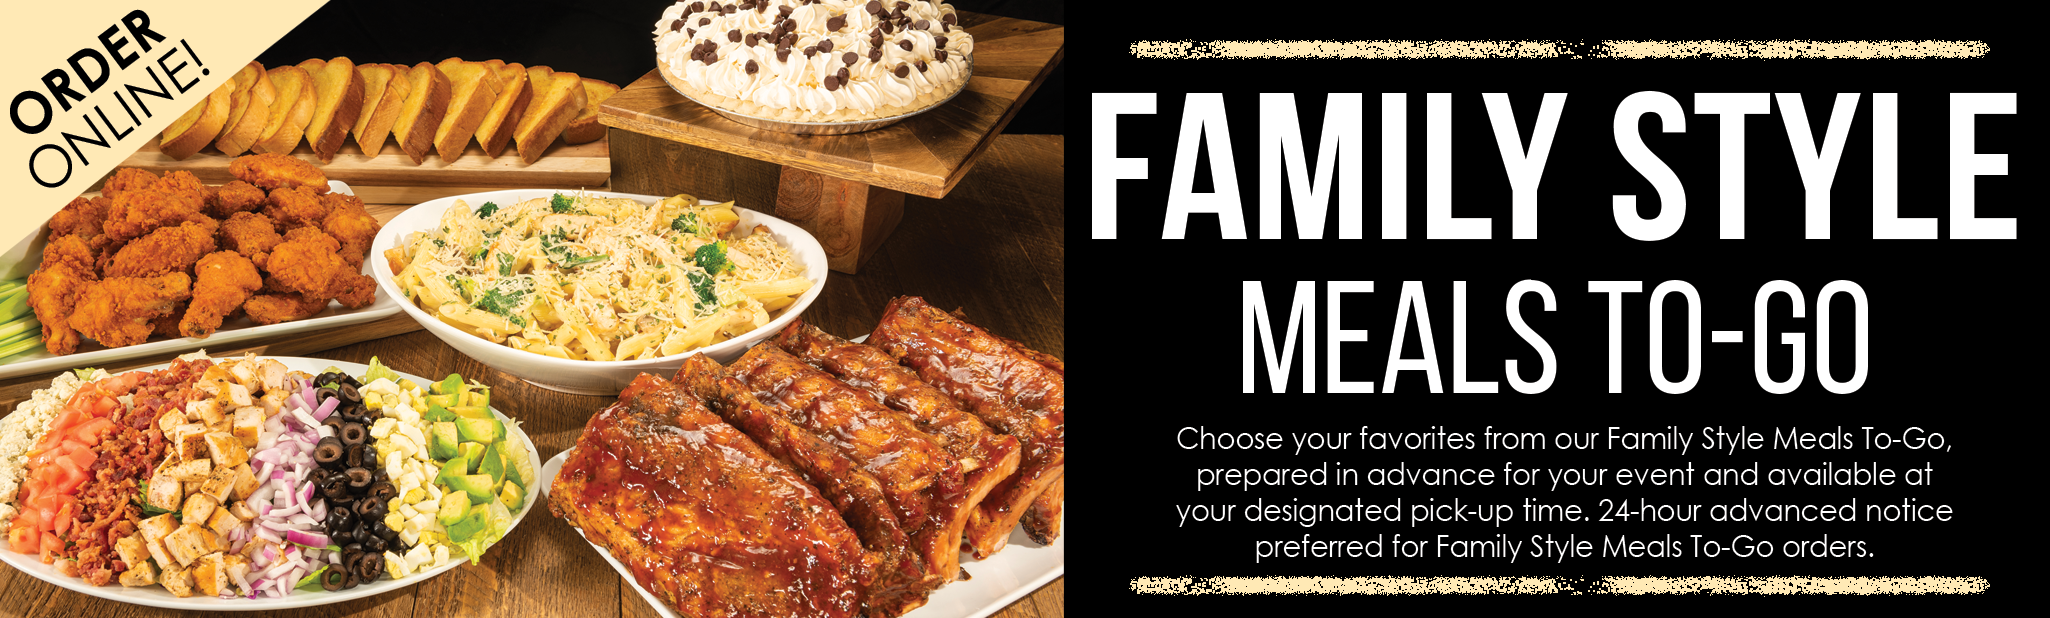 Family style meals to-go